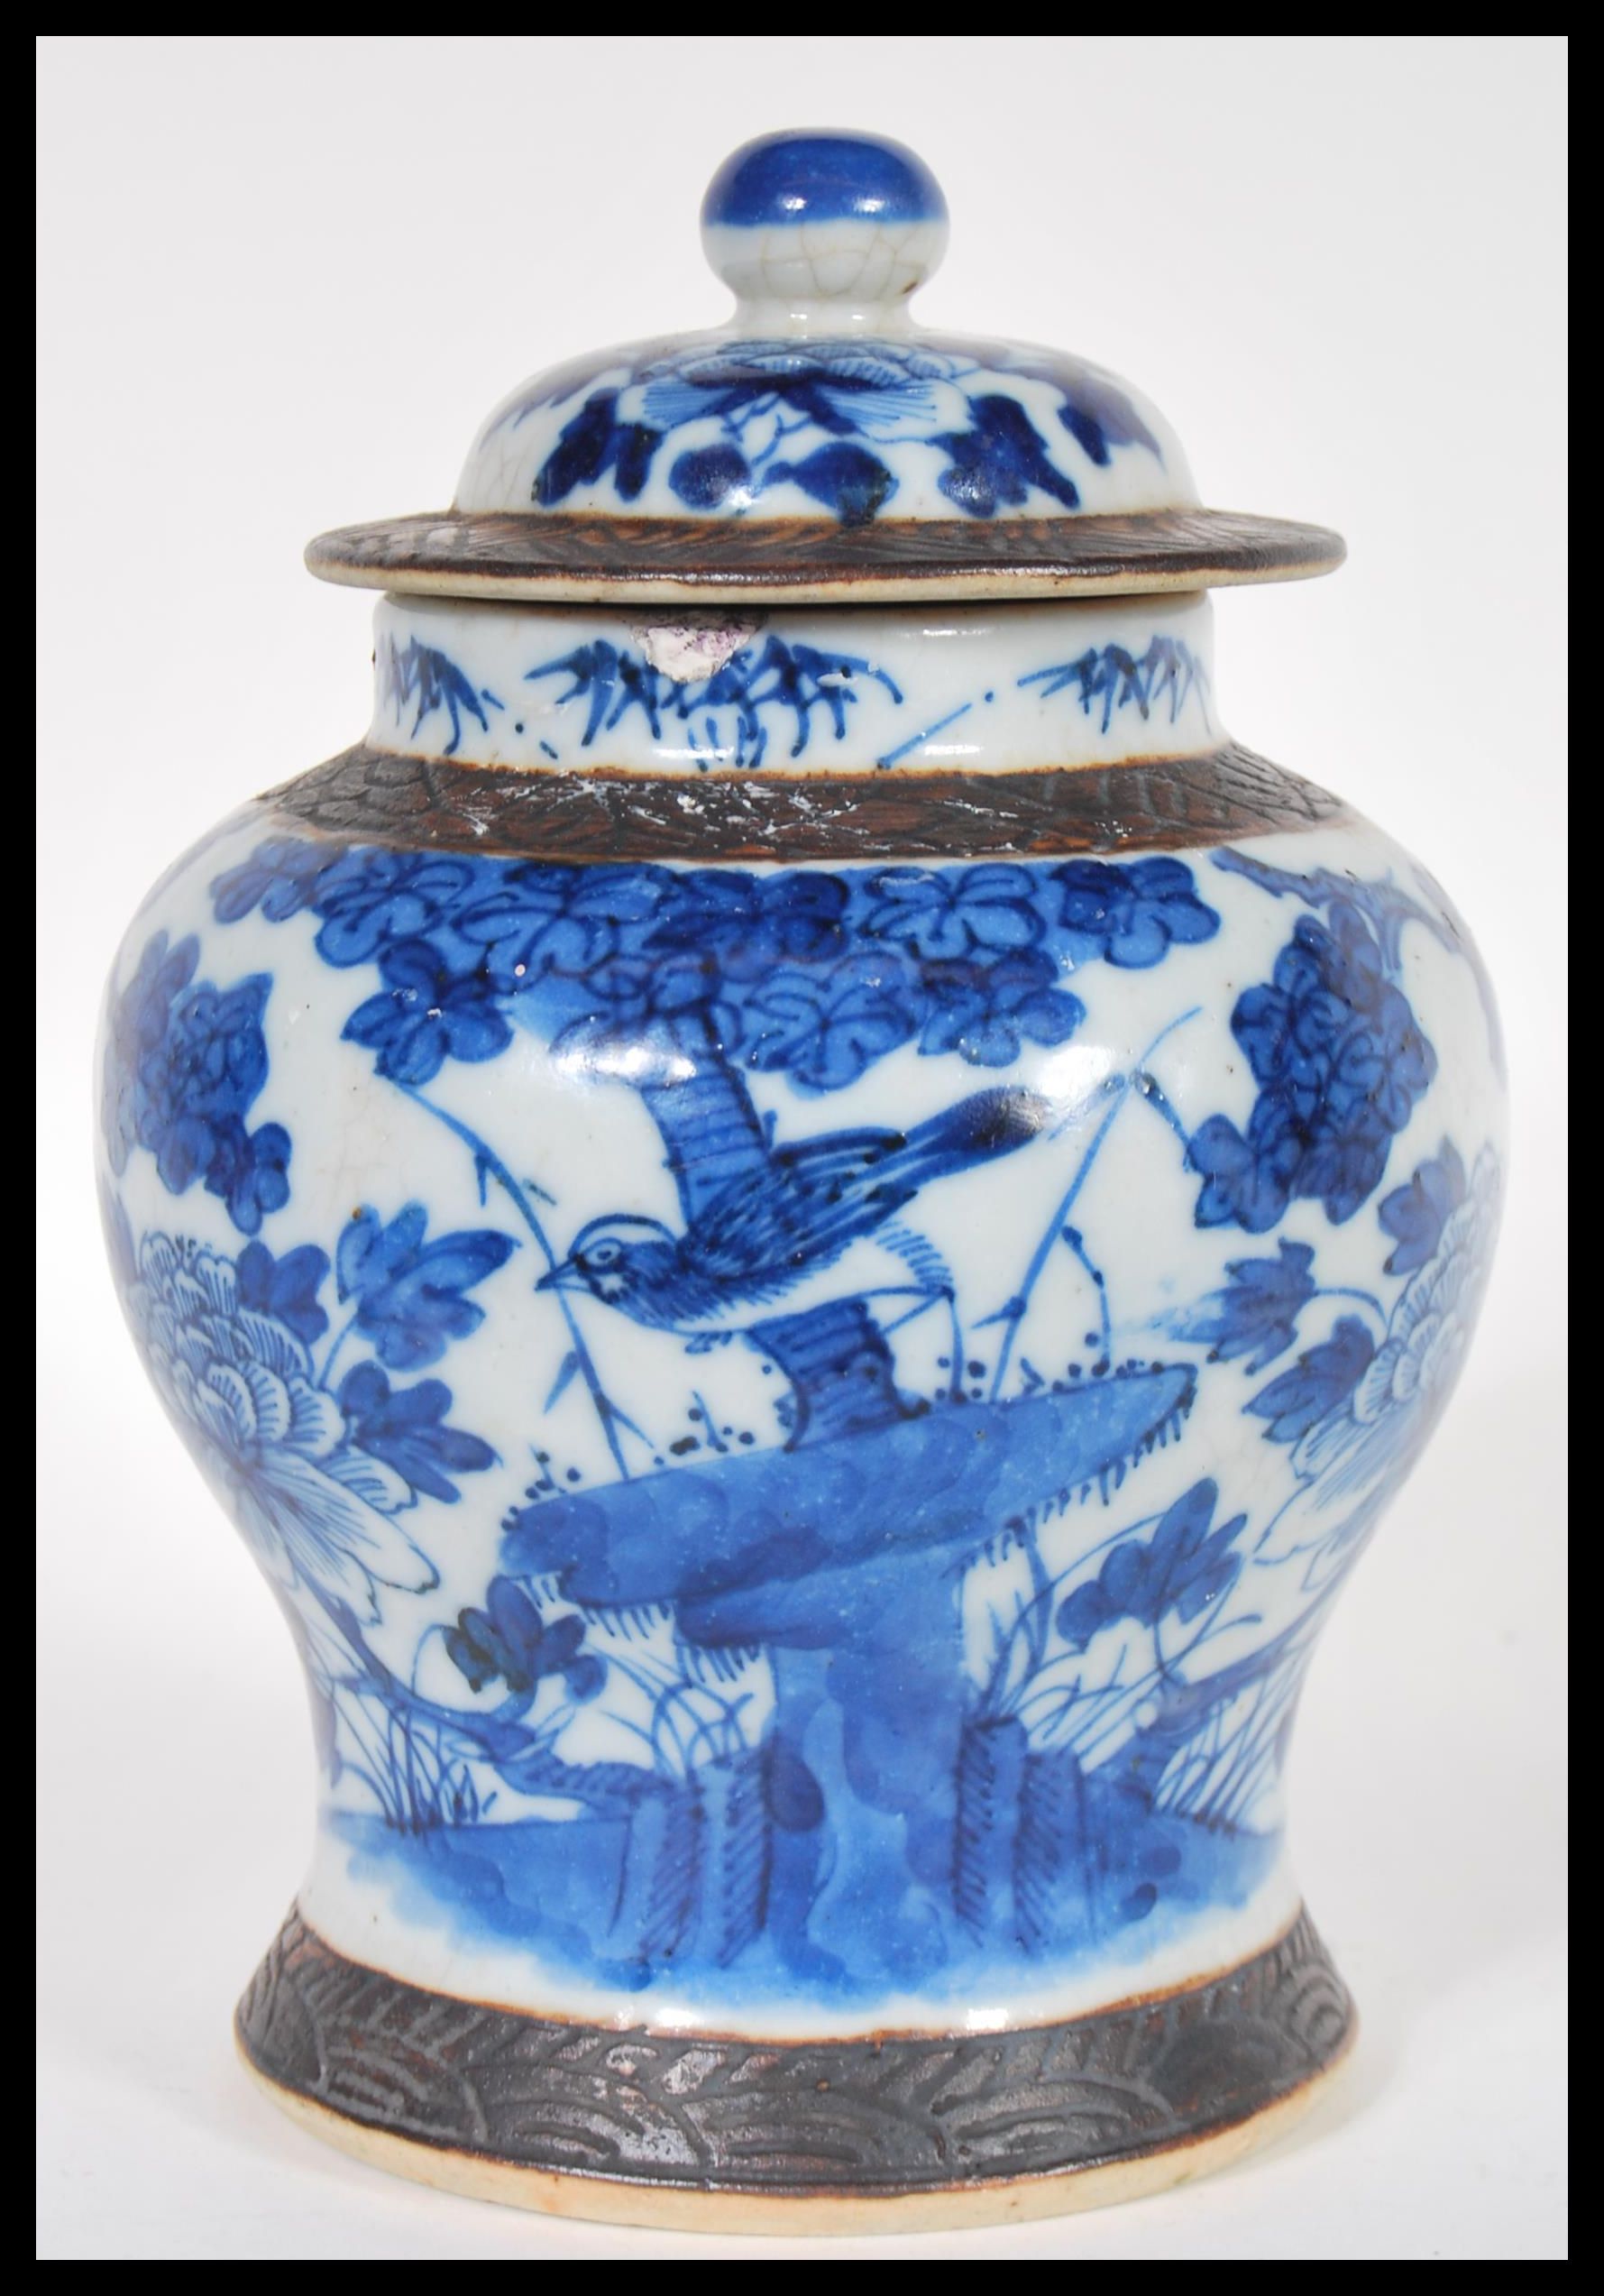 A 19th Century Chinese lidded jar or vase and cove